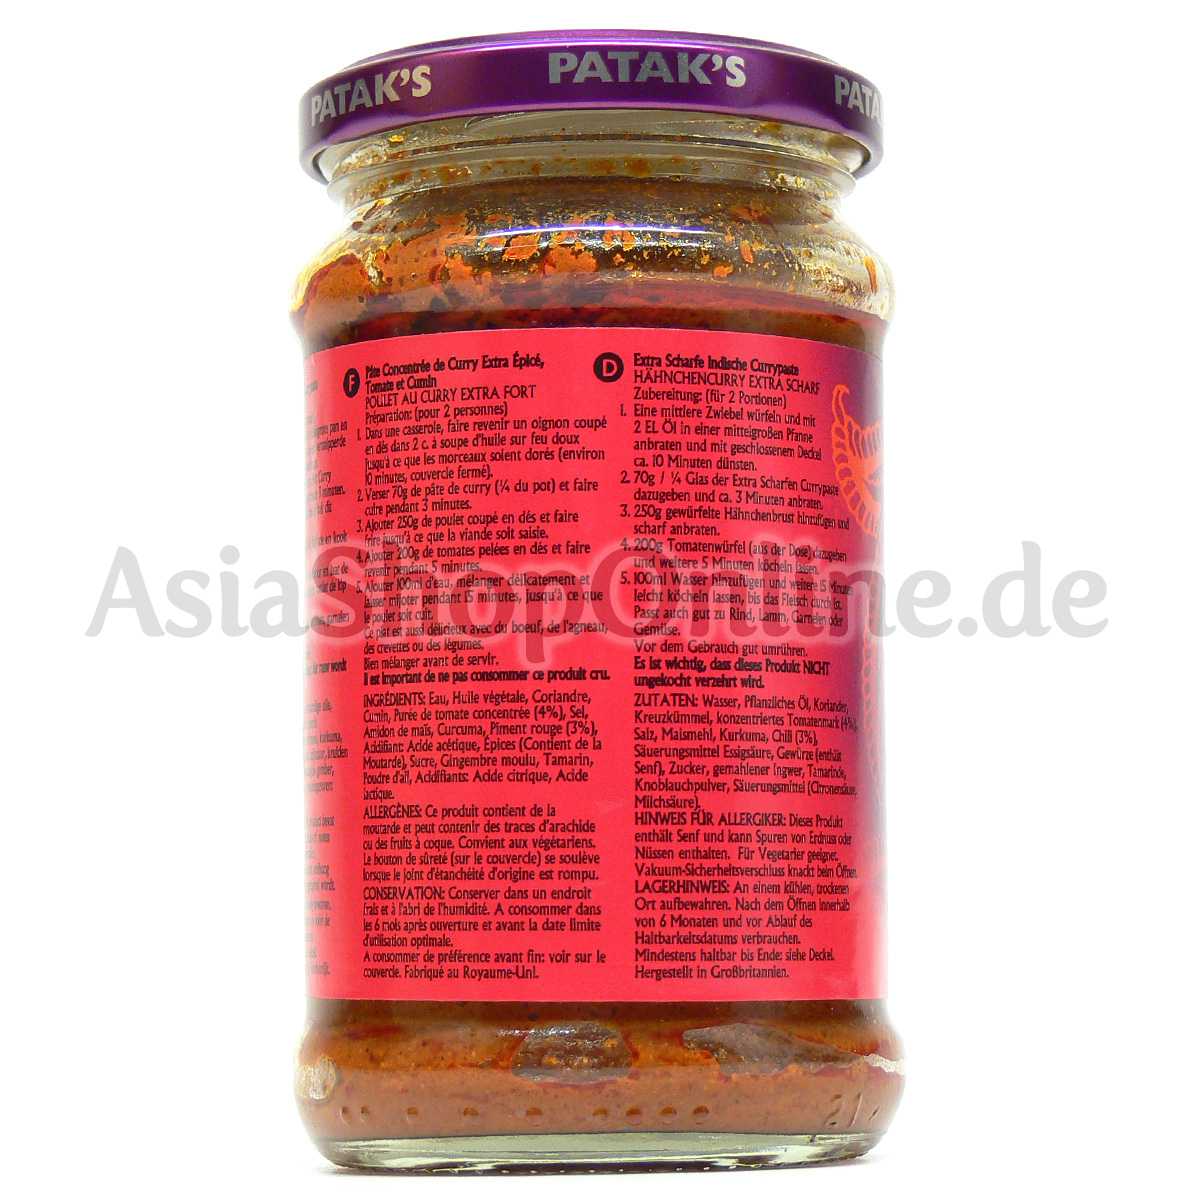 Extra Hot Curry Paste - Pataks - 283g